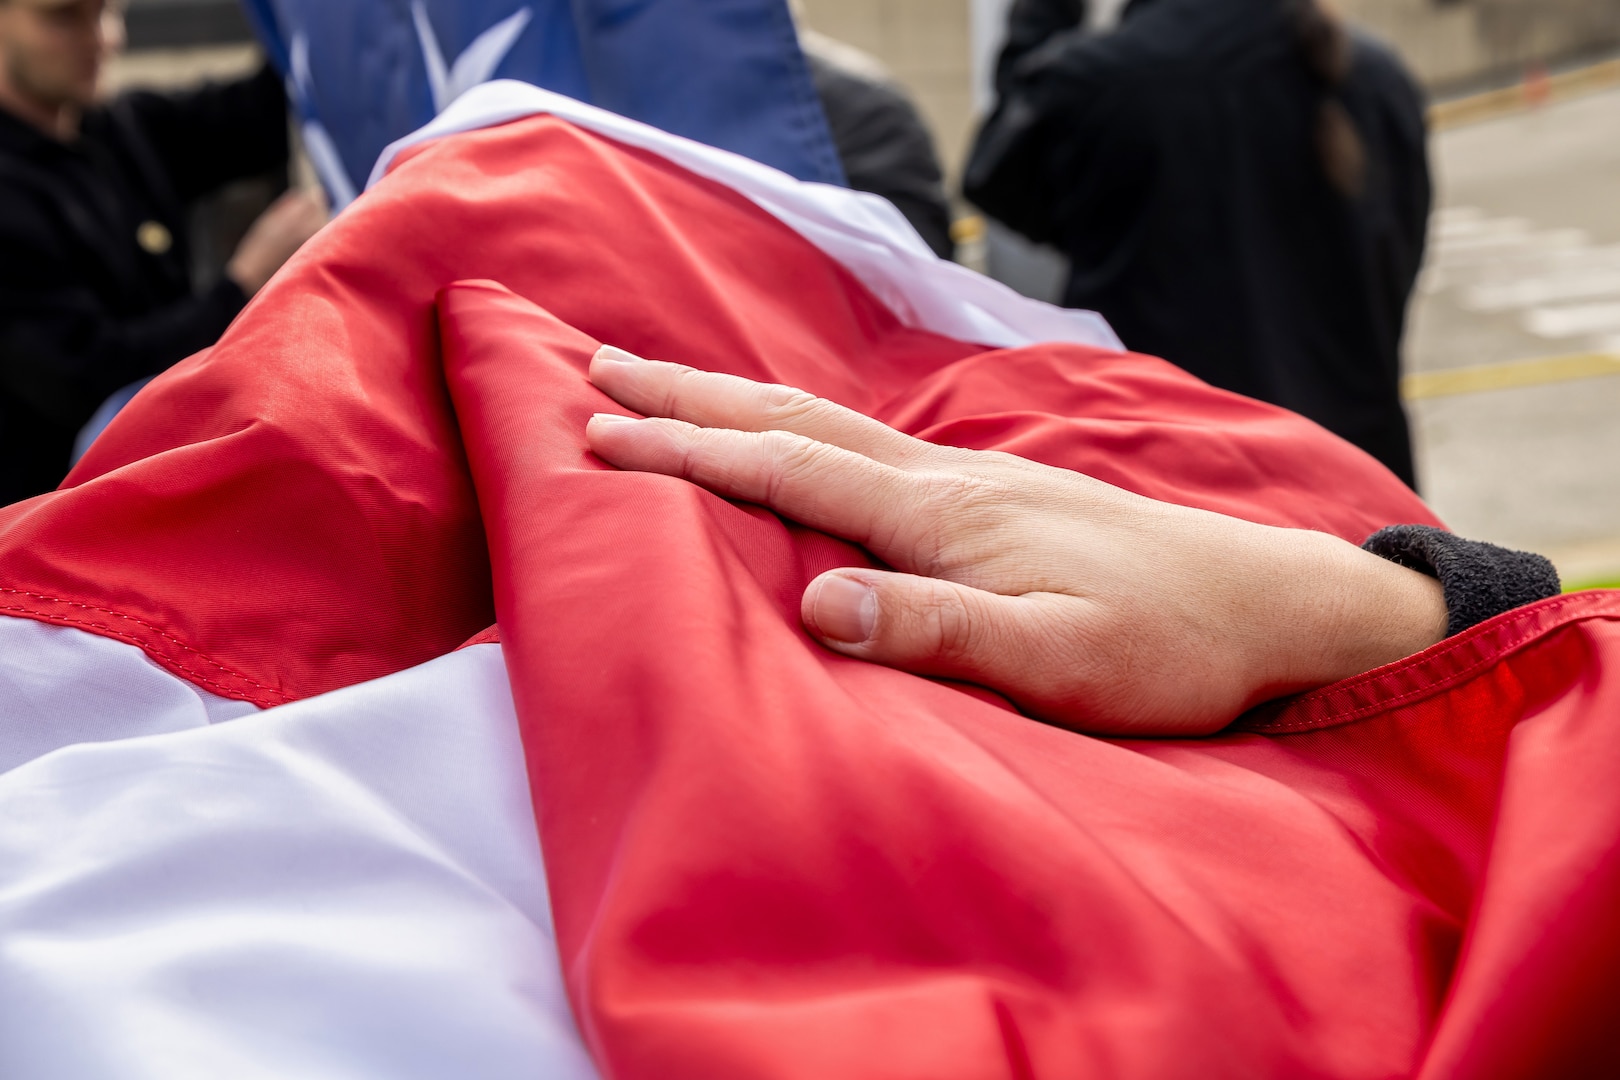 A Sailor's hand helps secure the new American flag as it's unfurled Nov. 9, 2023, during a special Veterans Day flag-replacement ceremony near the State Street Gate Entrance at Puget Sound Naval Shipyard & Intermediate Maintenance Facility in Bremerton, Wash. (U.S. Navy photo by Ben Hutto)